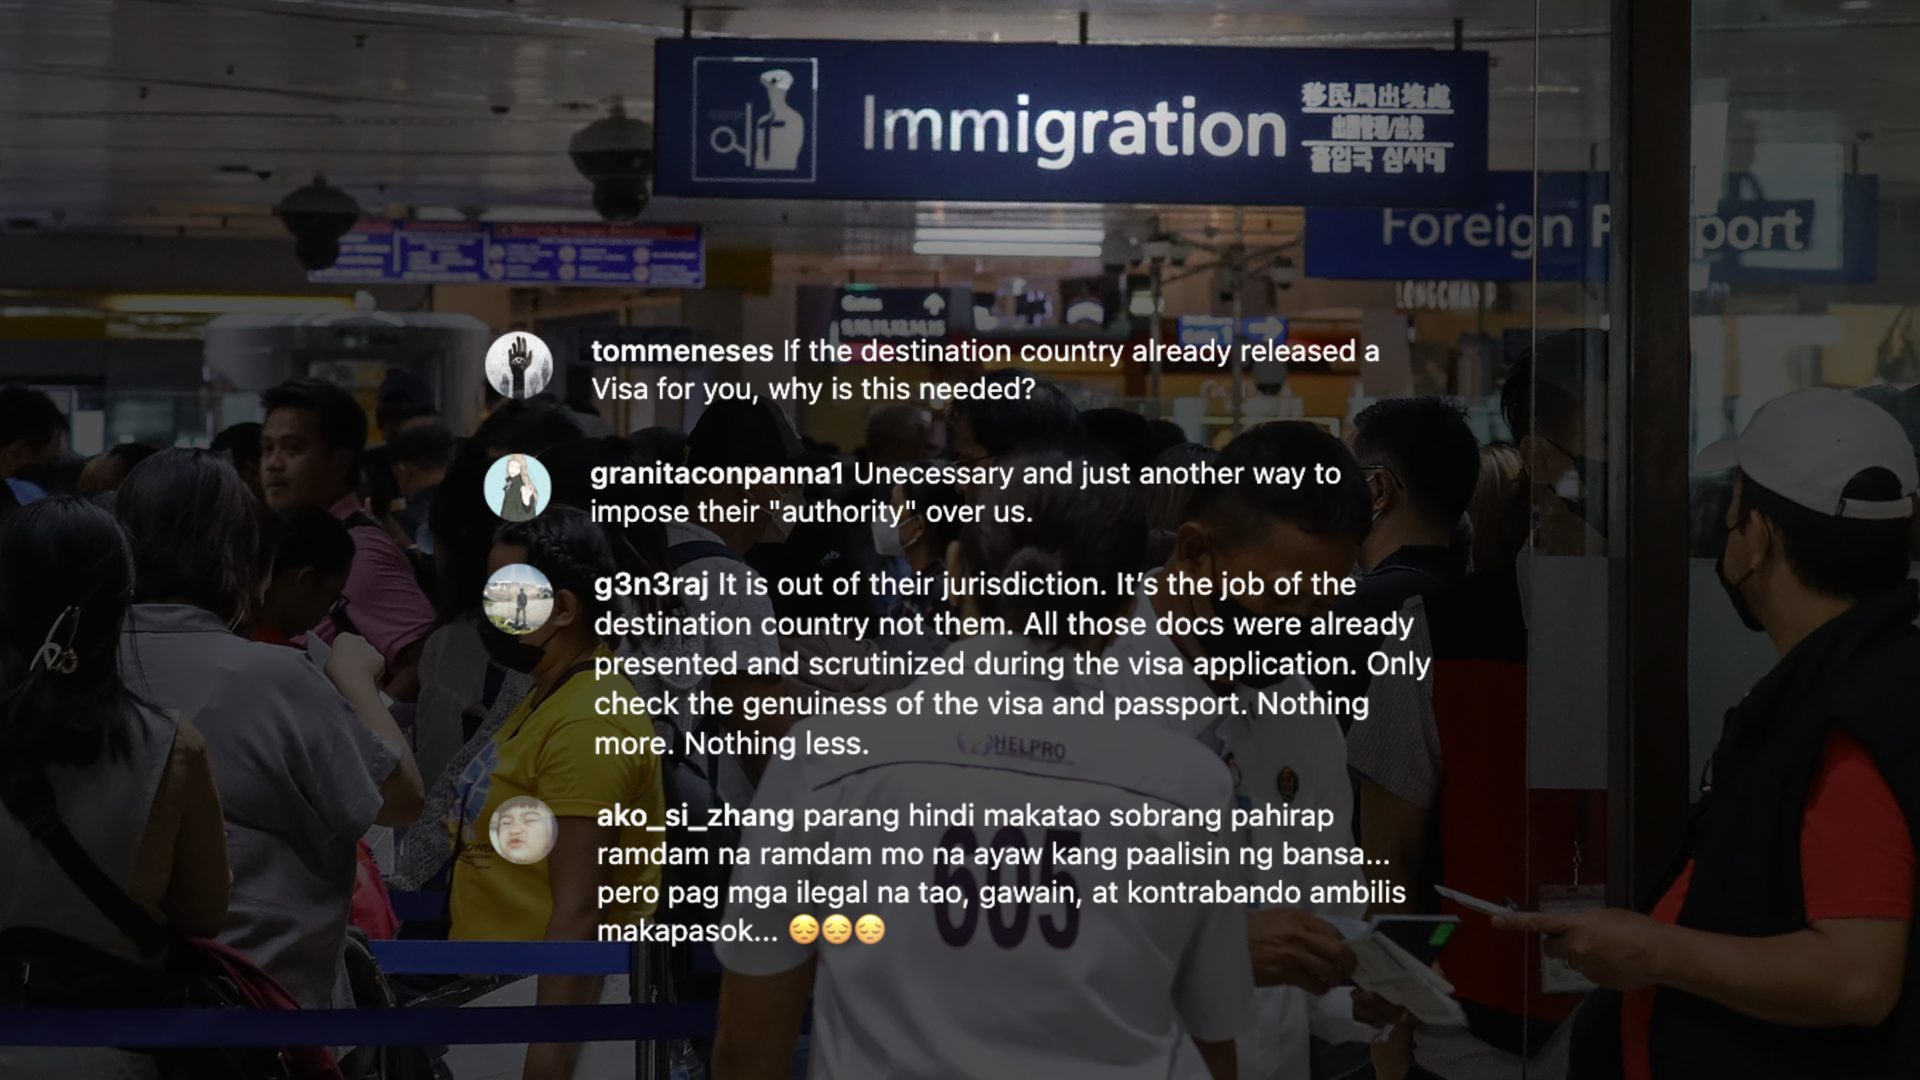 Travelers have other ideas for fighting trafficking without much immigration paperwork